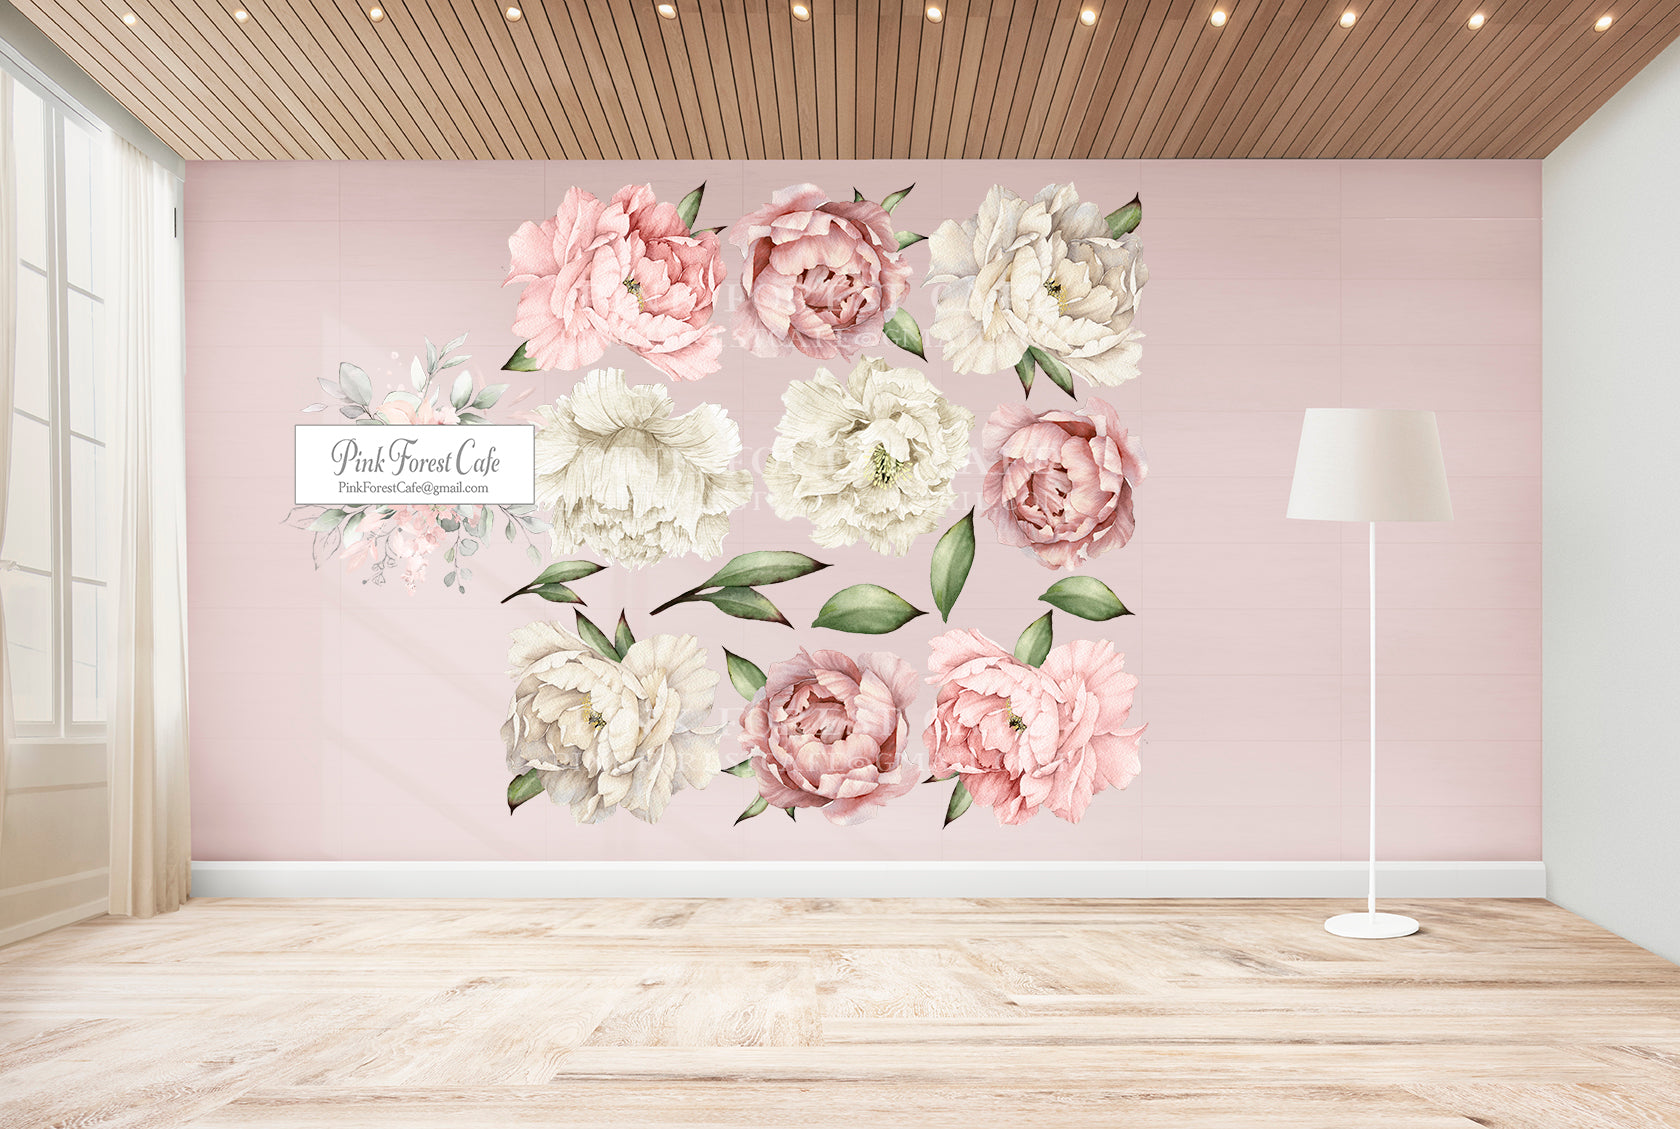 10x10" Mini Pink Blush White Peonies Peony Wall Decal Sticker Rose Floral Watercolor Flowers Boho Decor